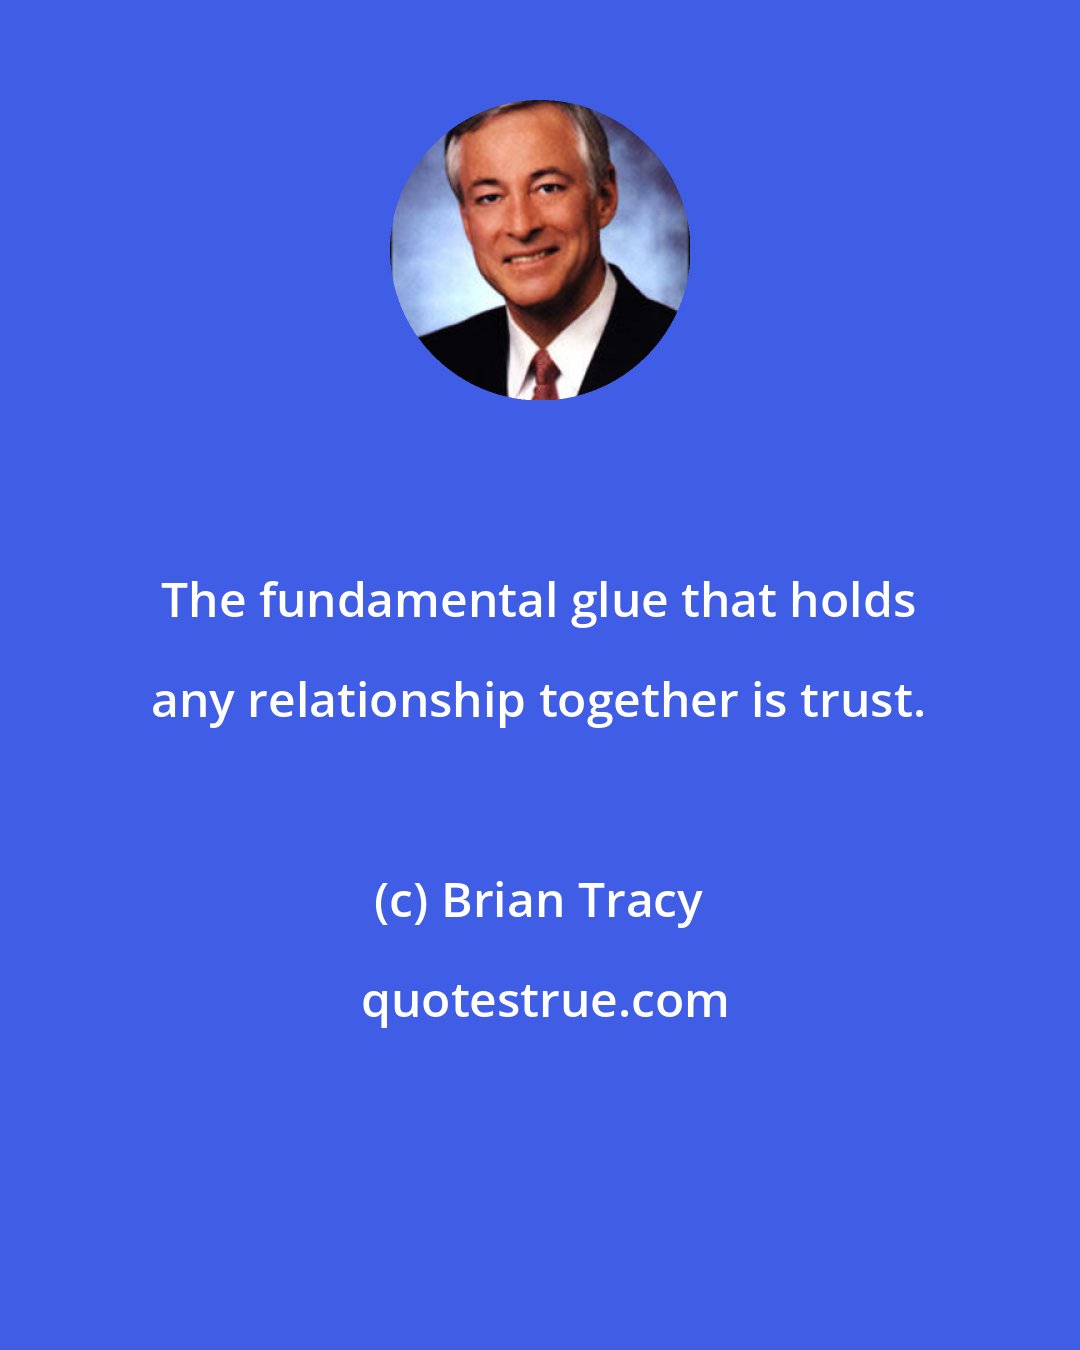 Brian Tracy: The fundamental glue that holds any relationship together is trust.